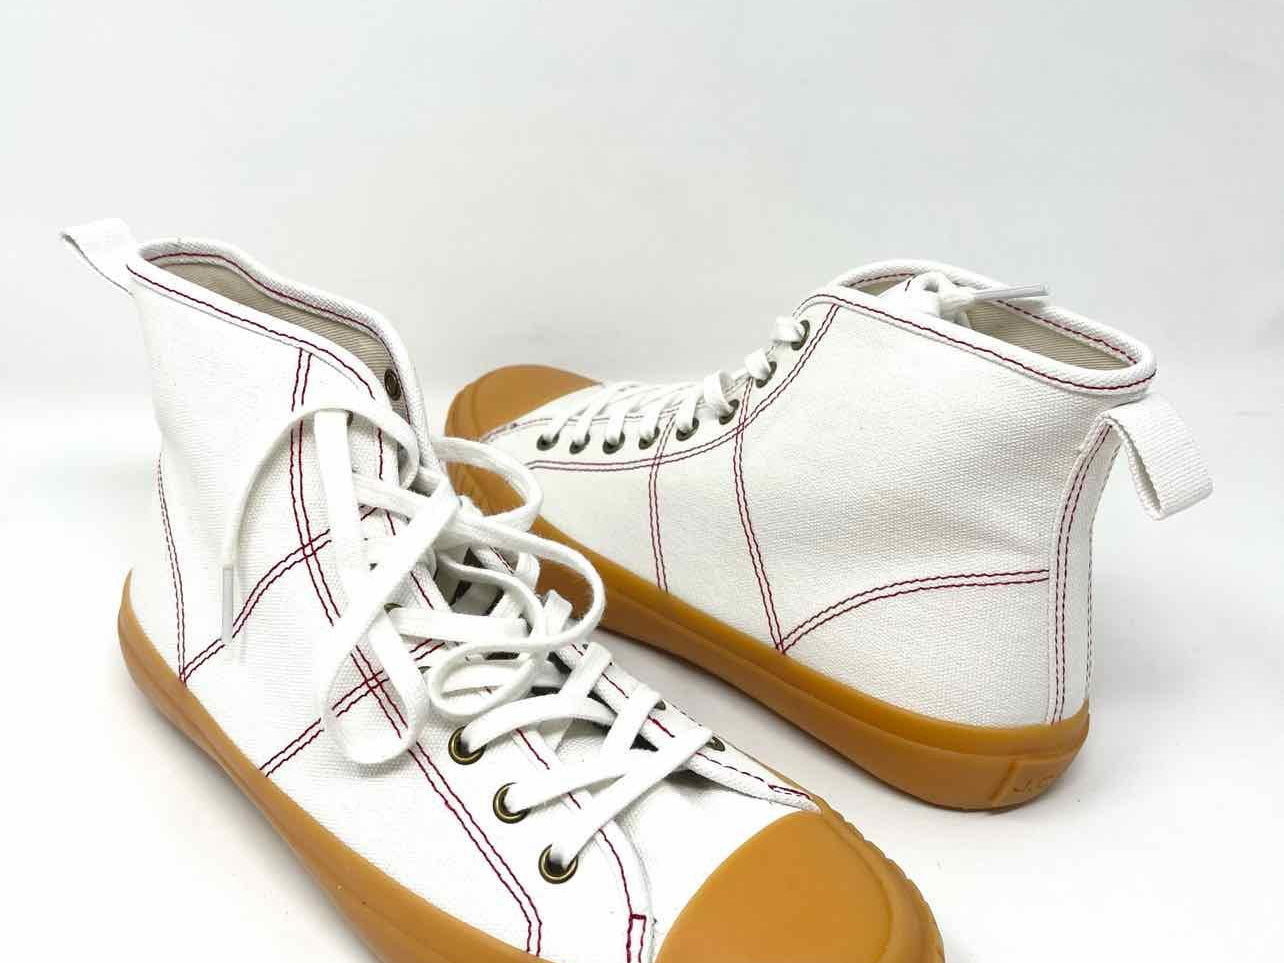 J Crew Women's white/tan Hi-top Canvas Rubber Stitched Size 8.5 Sneakers - Article Consignment